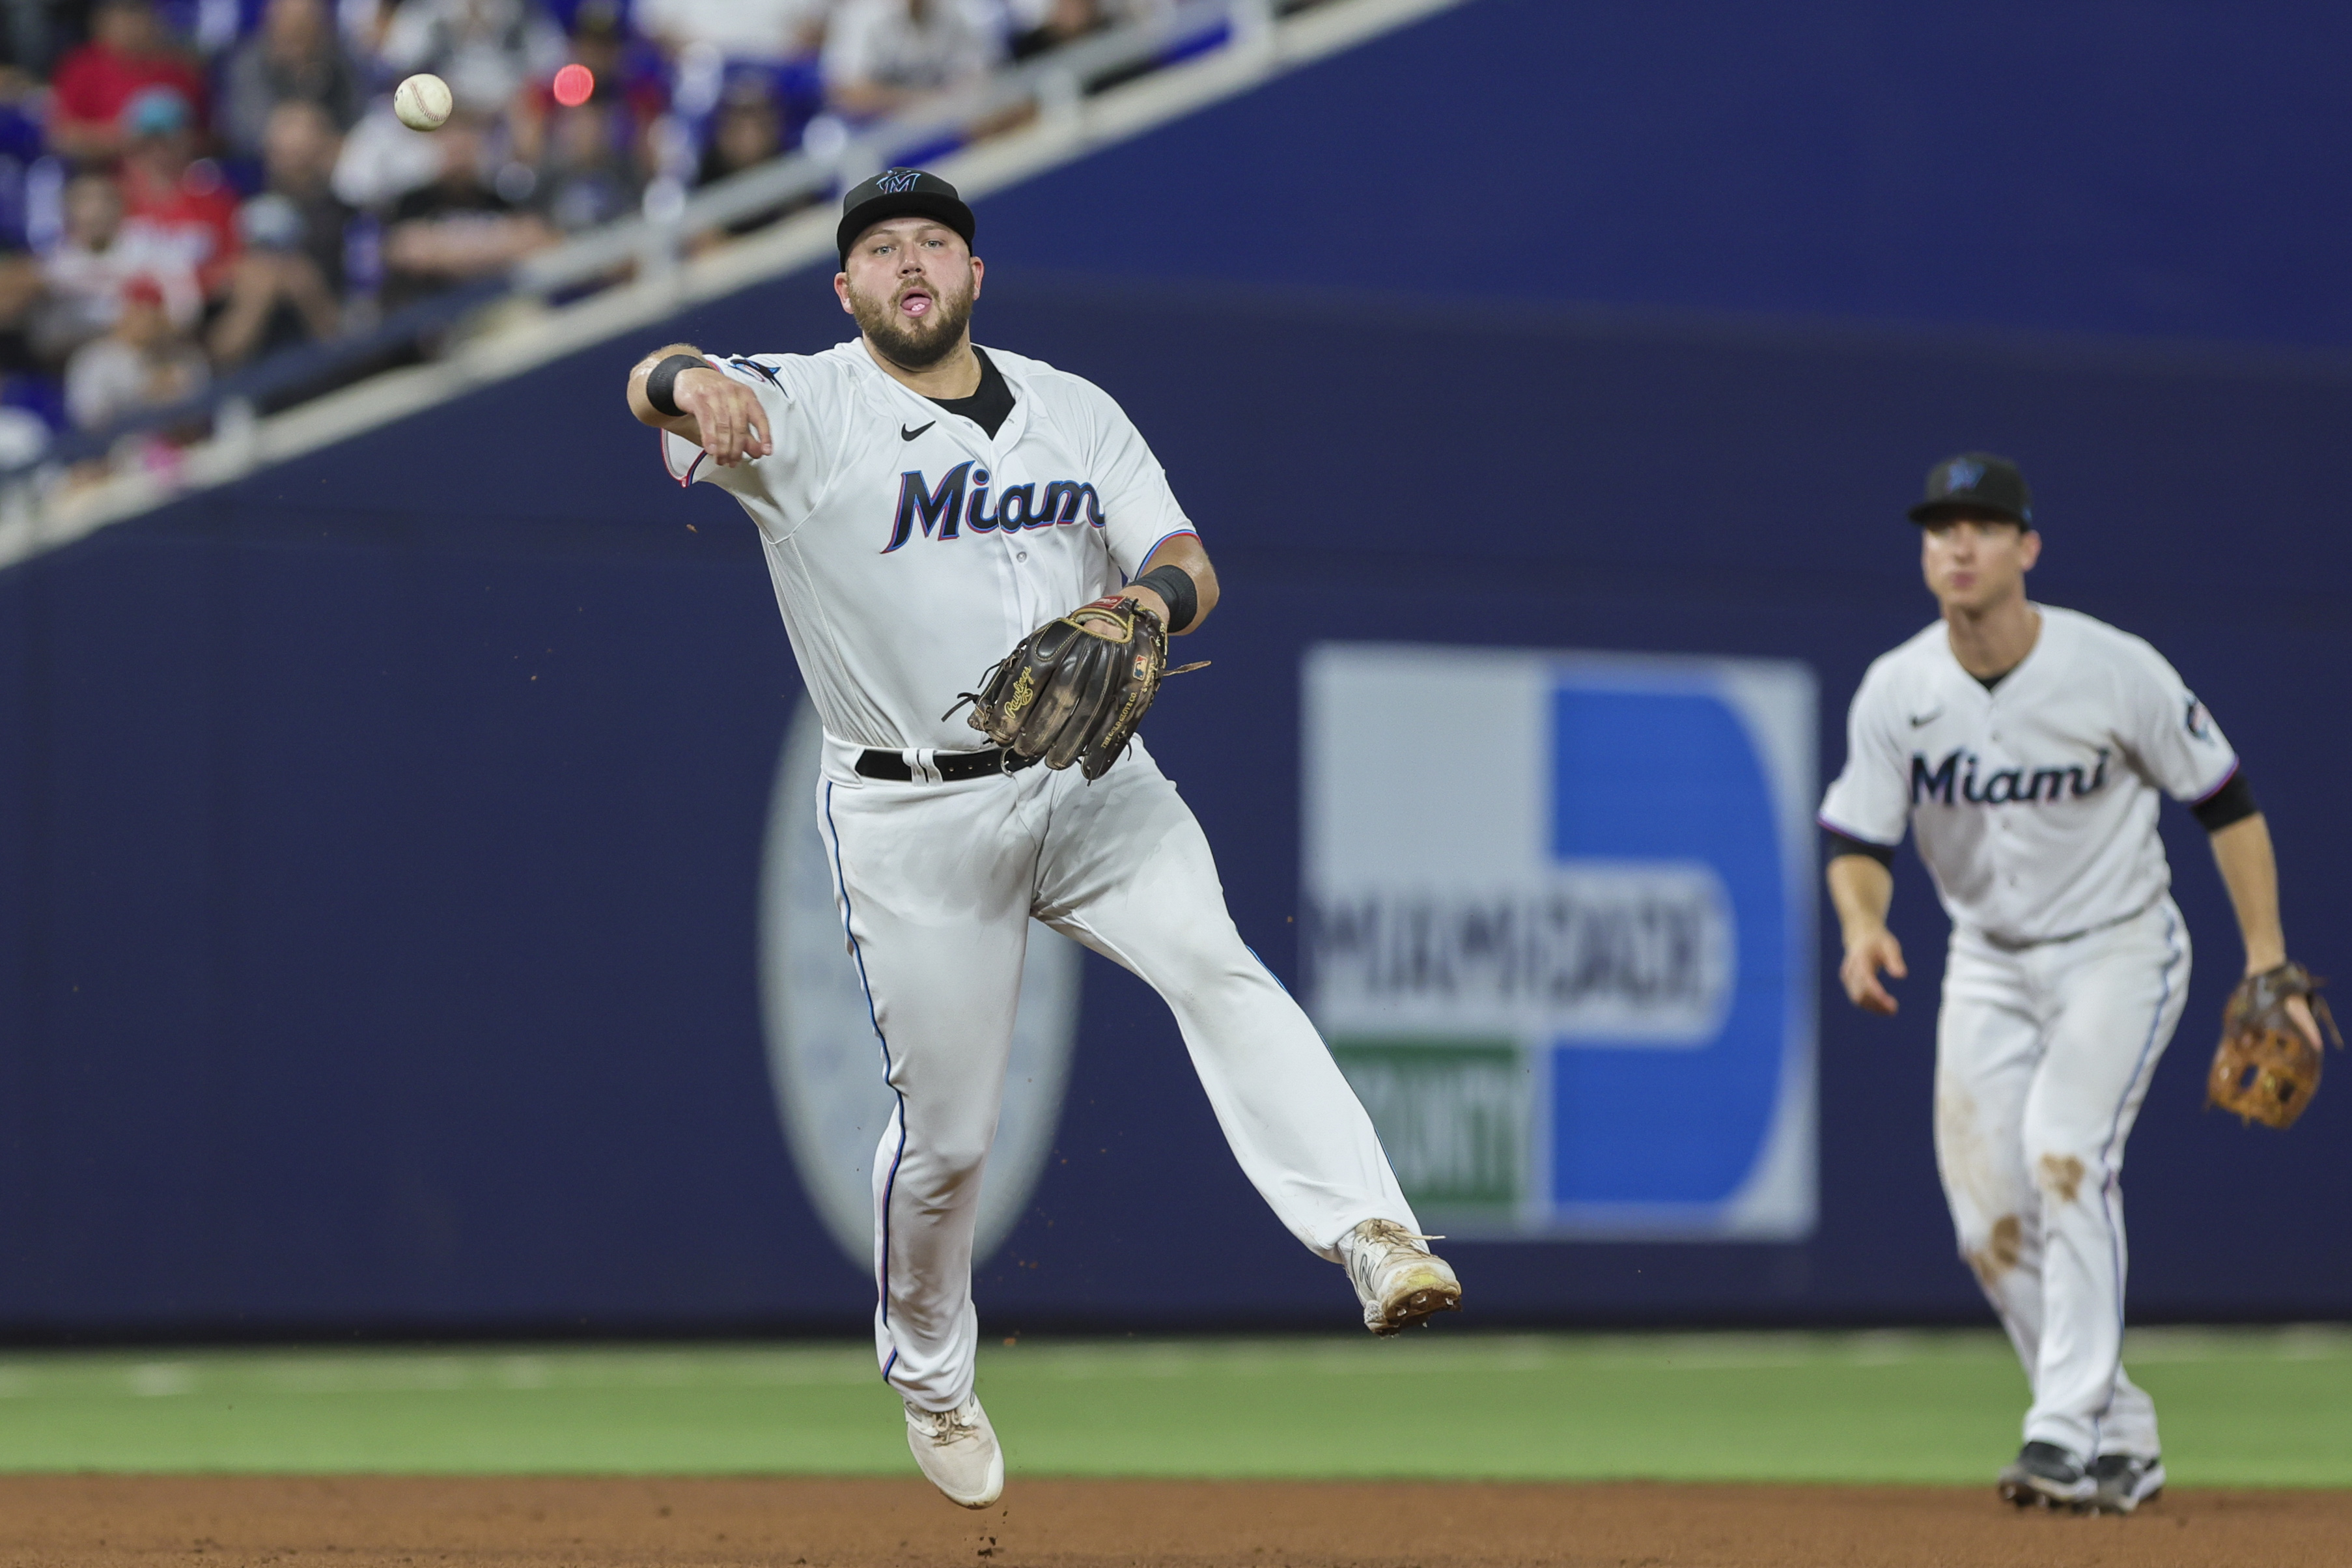 White Sox: Watching Jake Burger play for the Miami Marlins is awesome